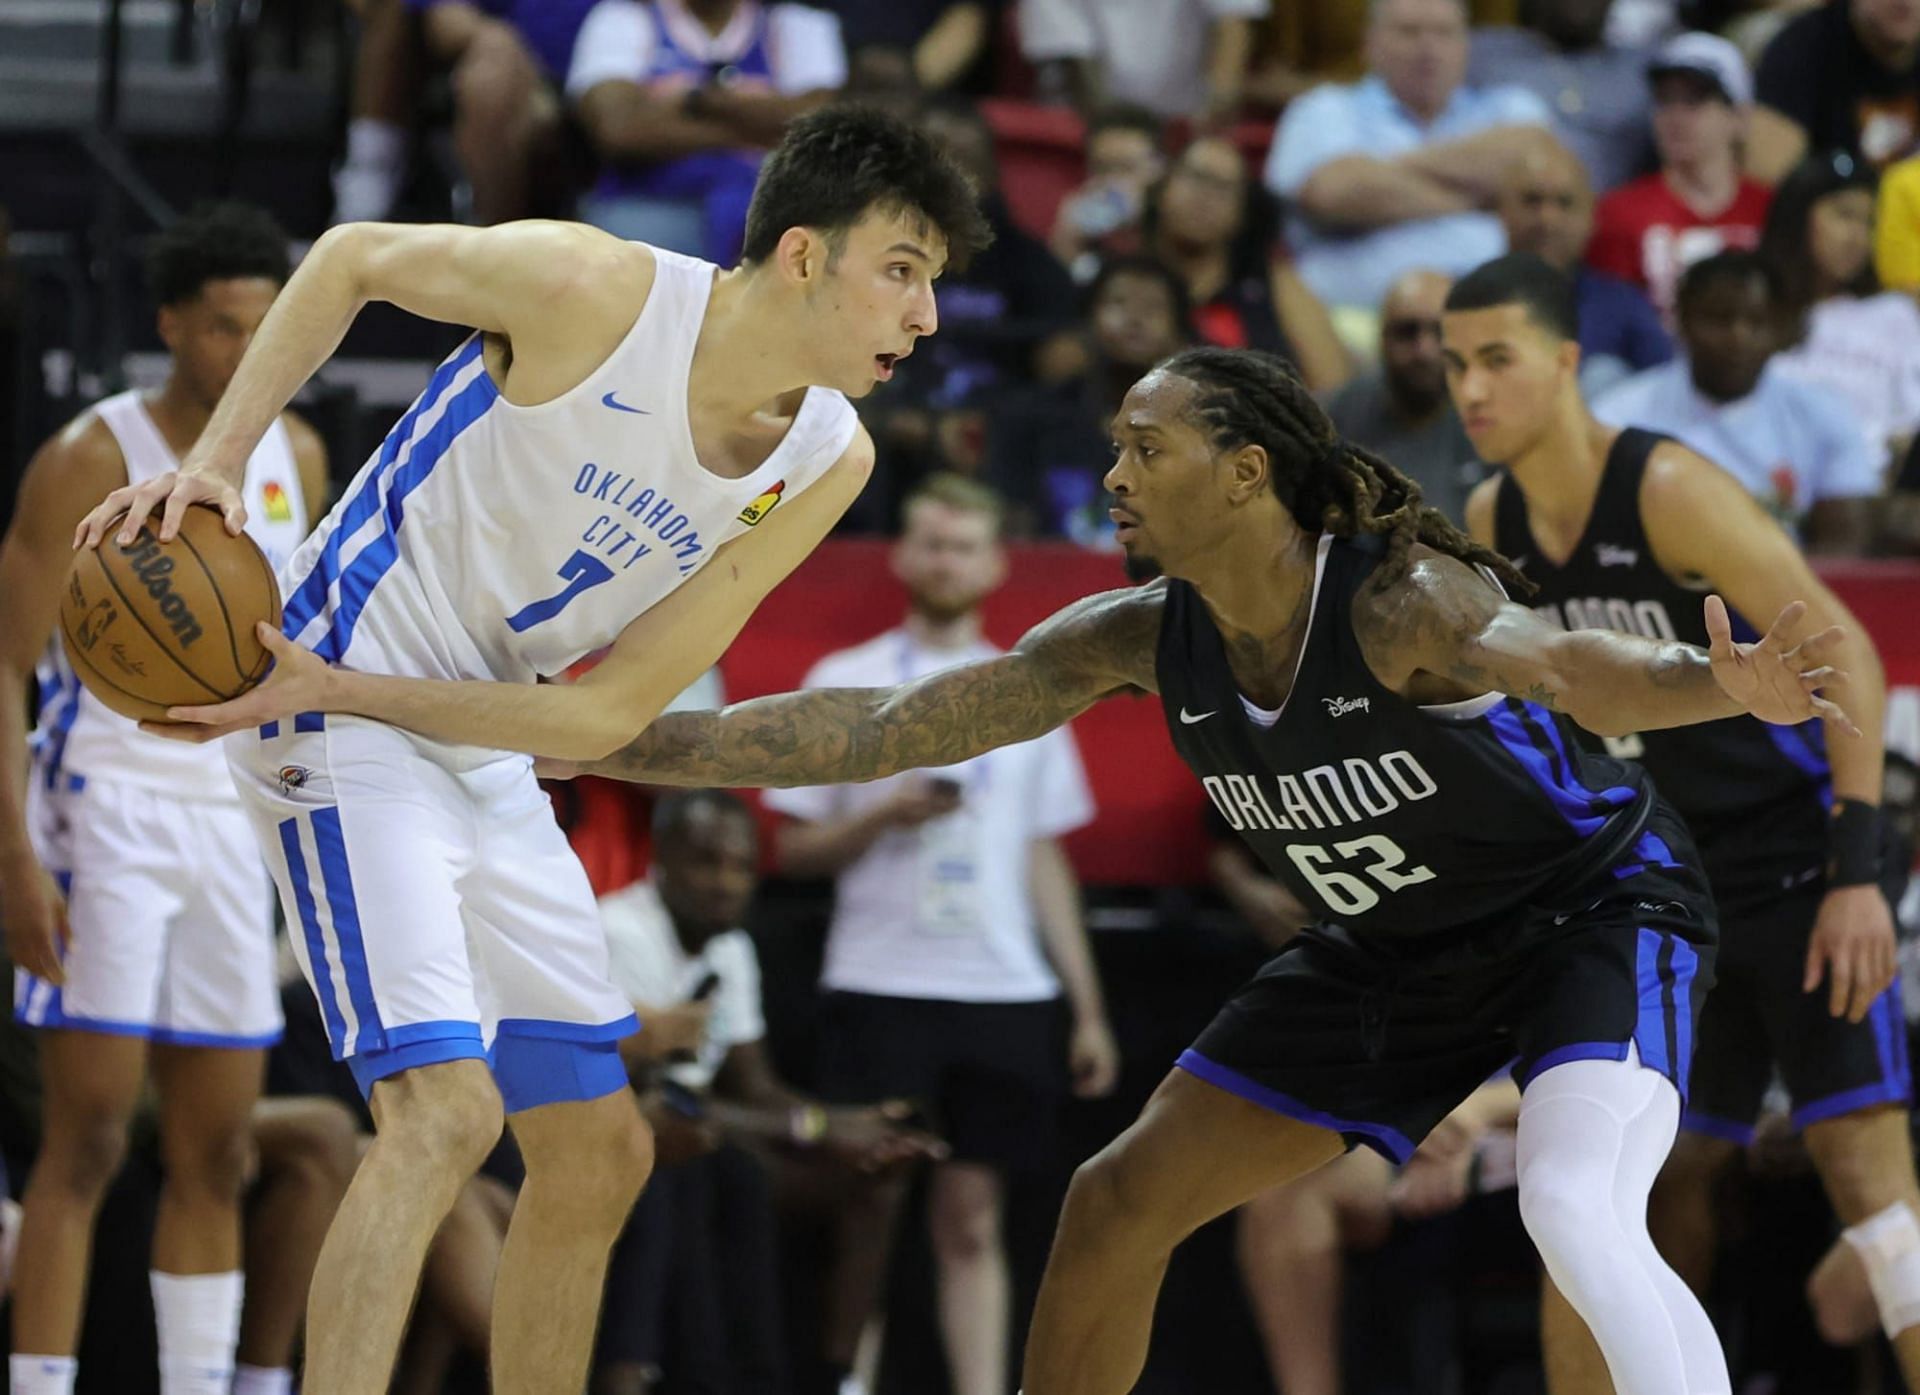 Emanuel Terry of the Orlando Magic against Chet Holmgren of the OKC Thunder in the Summer League